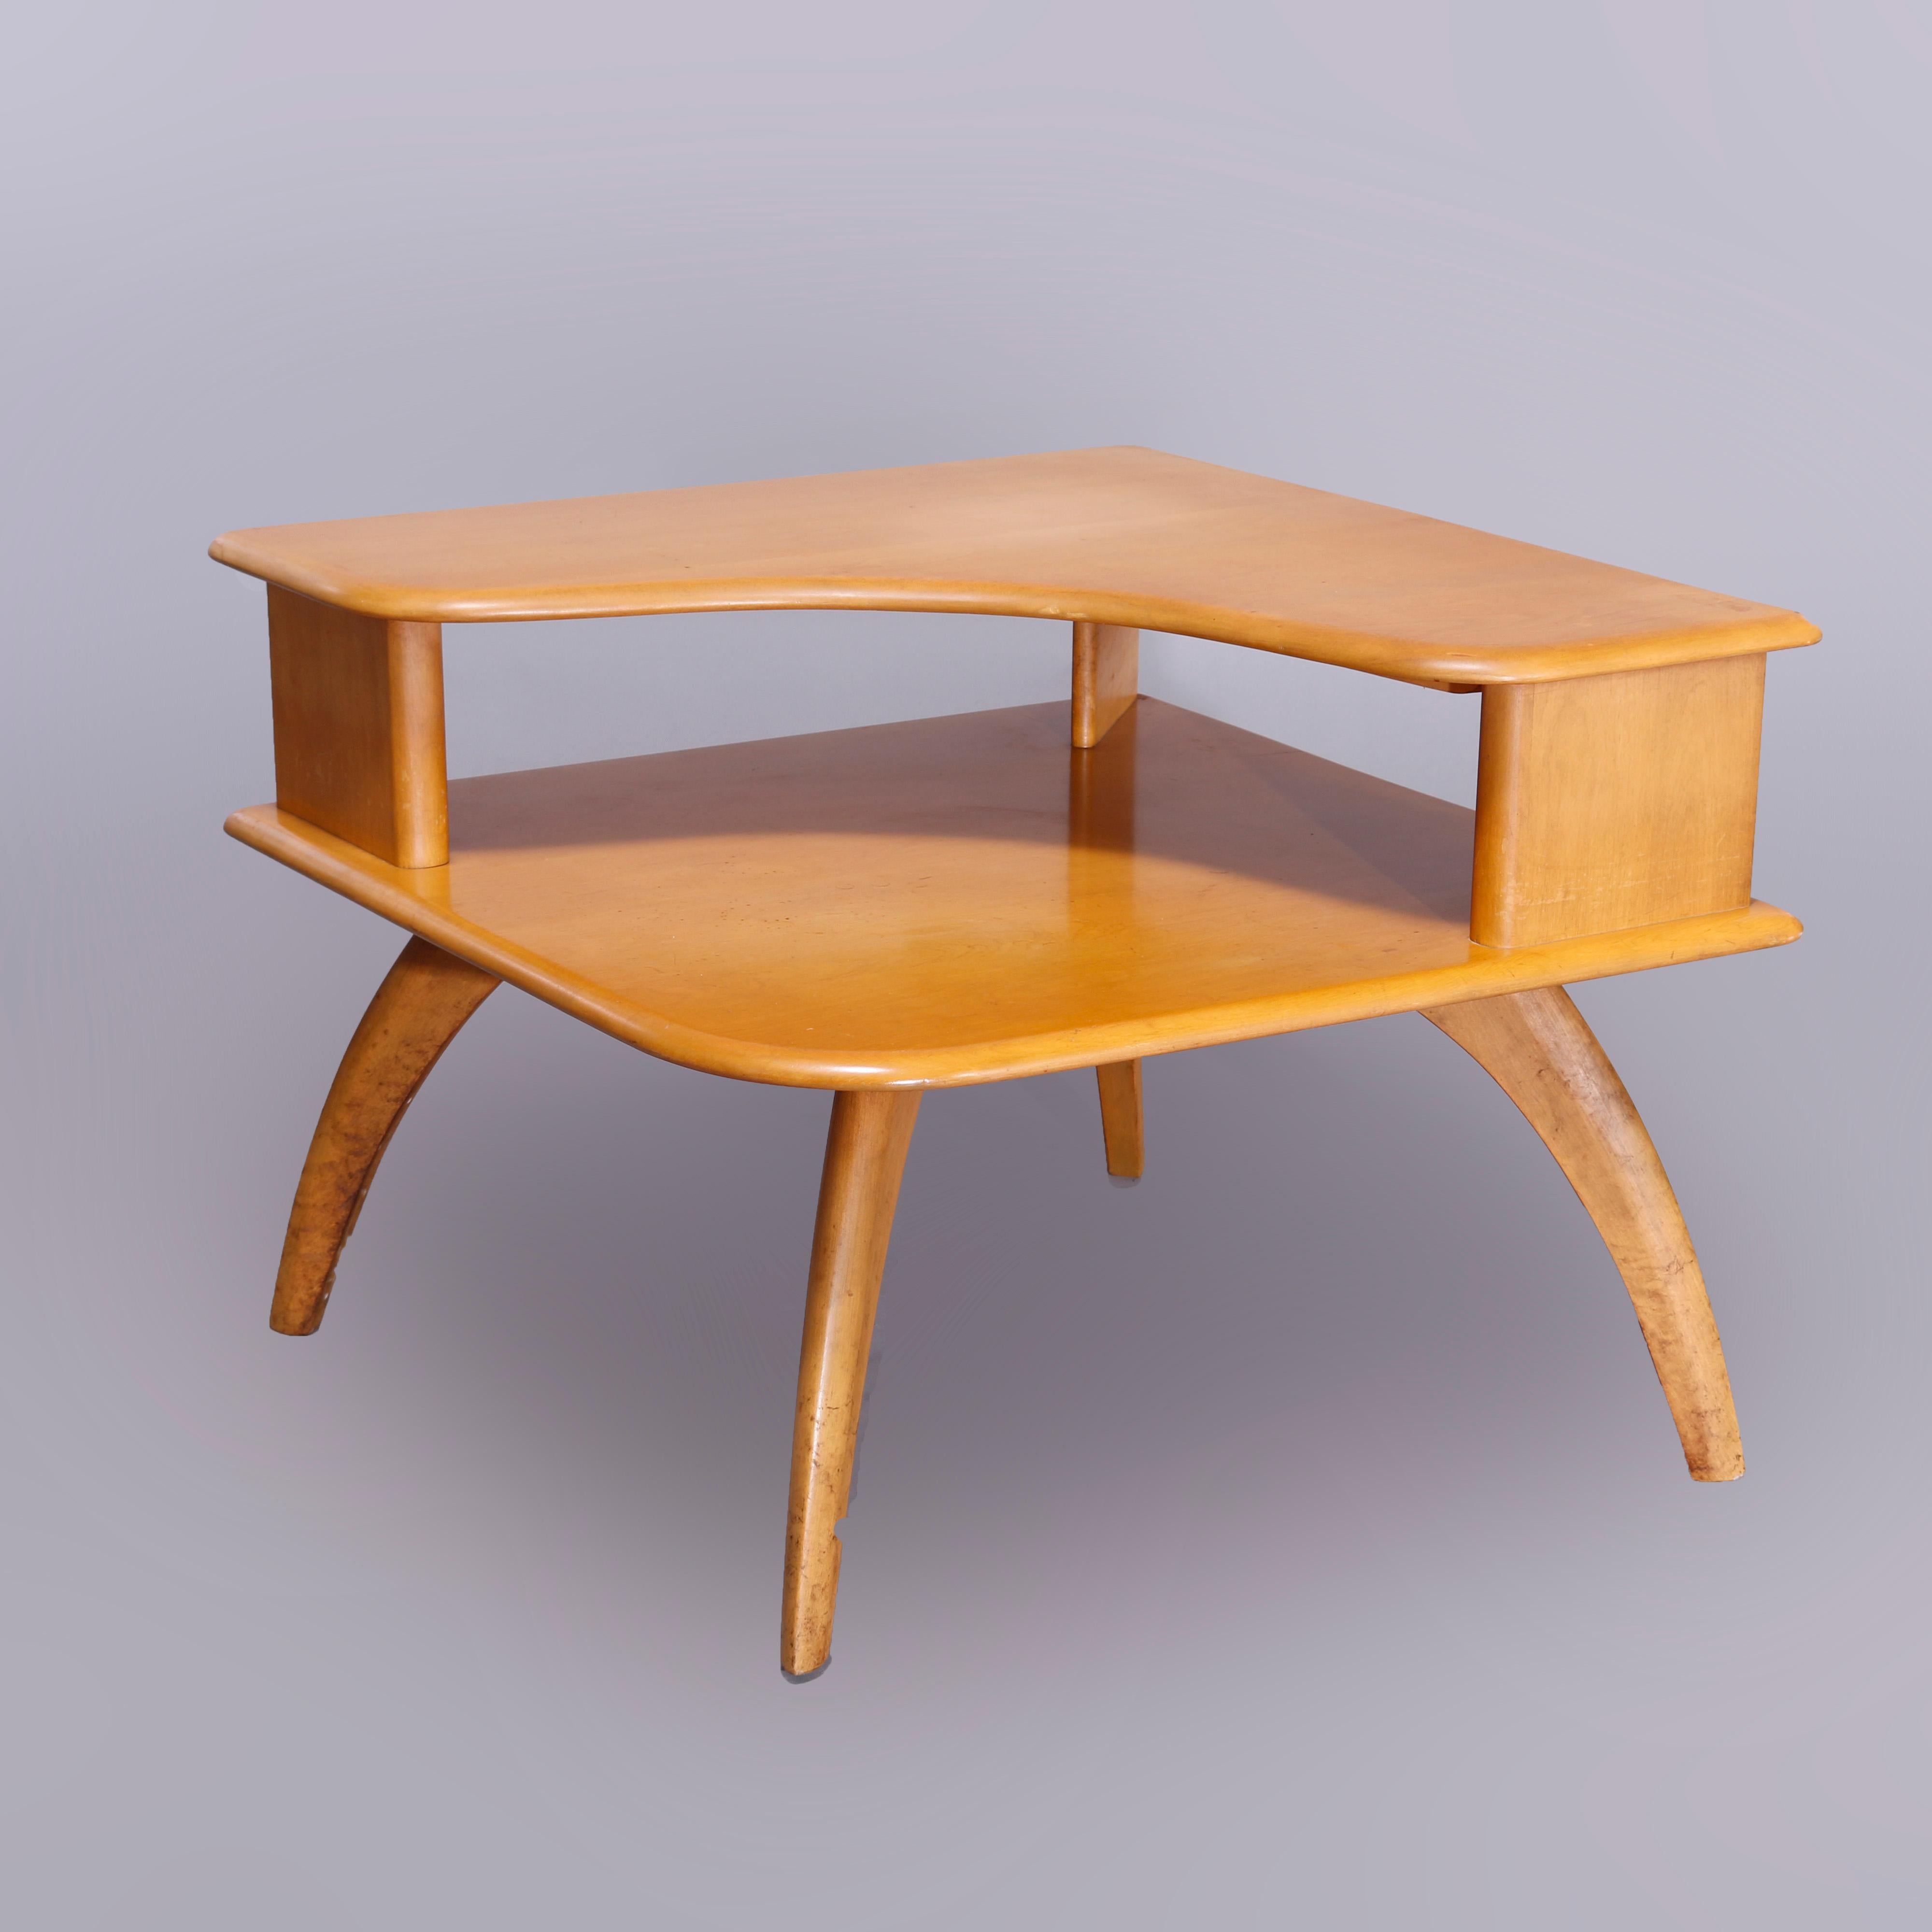 A Mid-Century Modern Heywood Wakefield corner side stand in the Wishbone pattern offers birch construction with step-back table raised on convex legs, wheat finish, maker mark as photographed, c1950

Measures - 24''H x 32''W x 32''D.

Catalogue